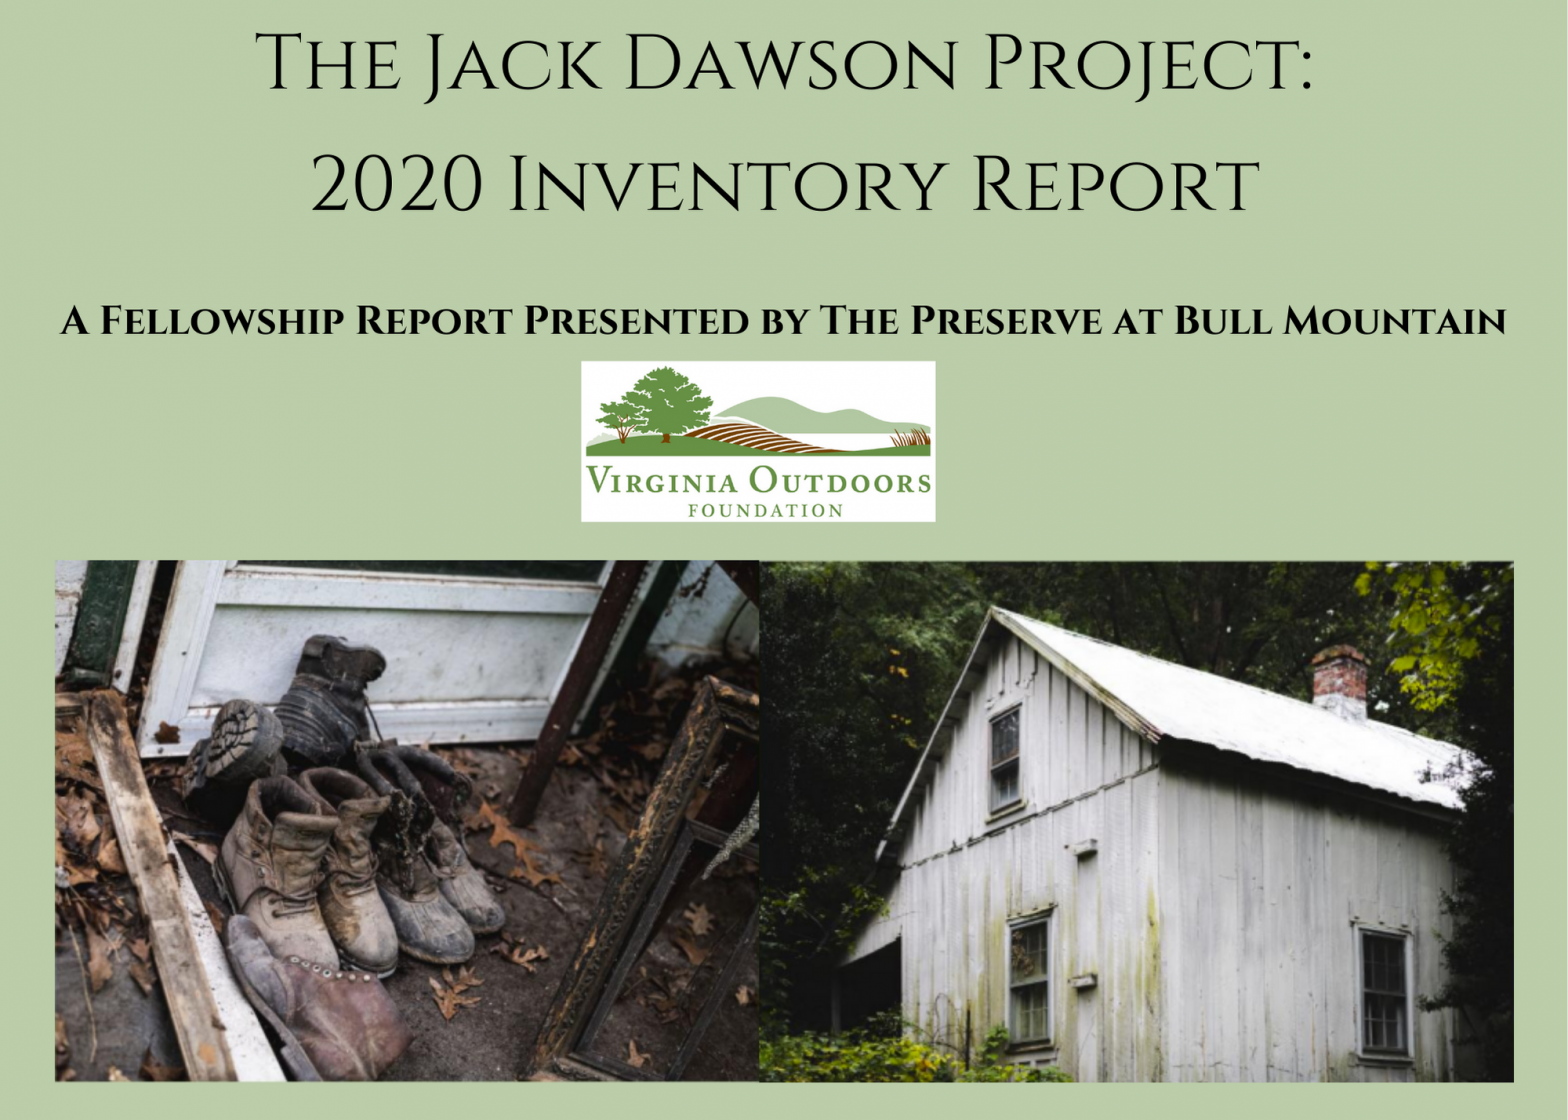 Jack Dawson Project 2020 Inventory Report